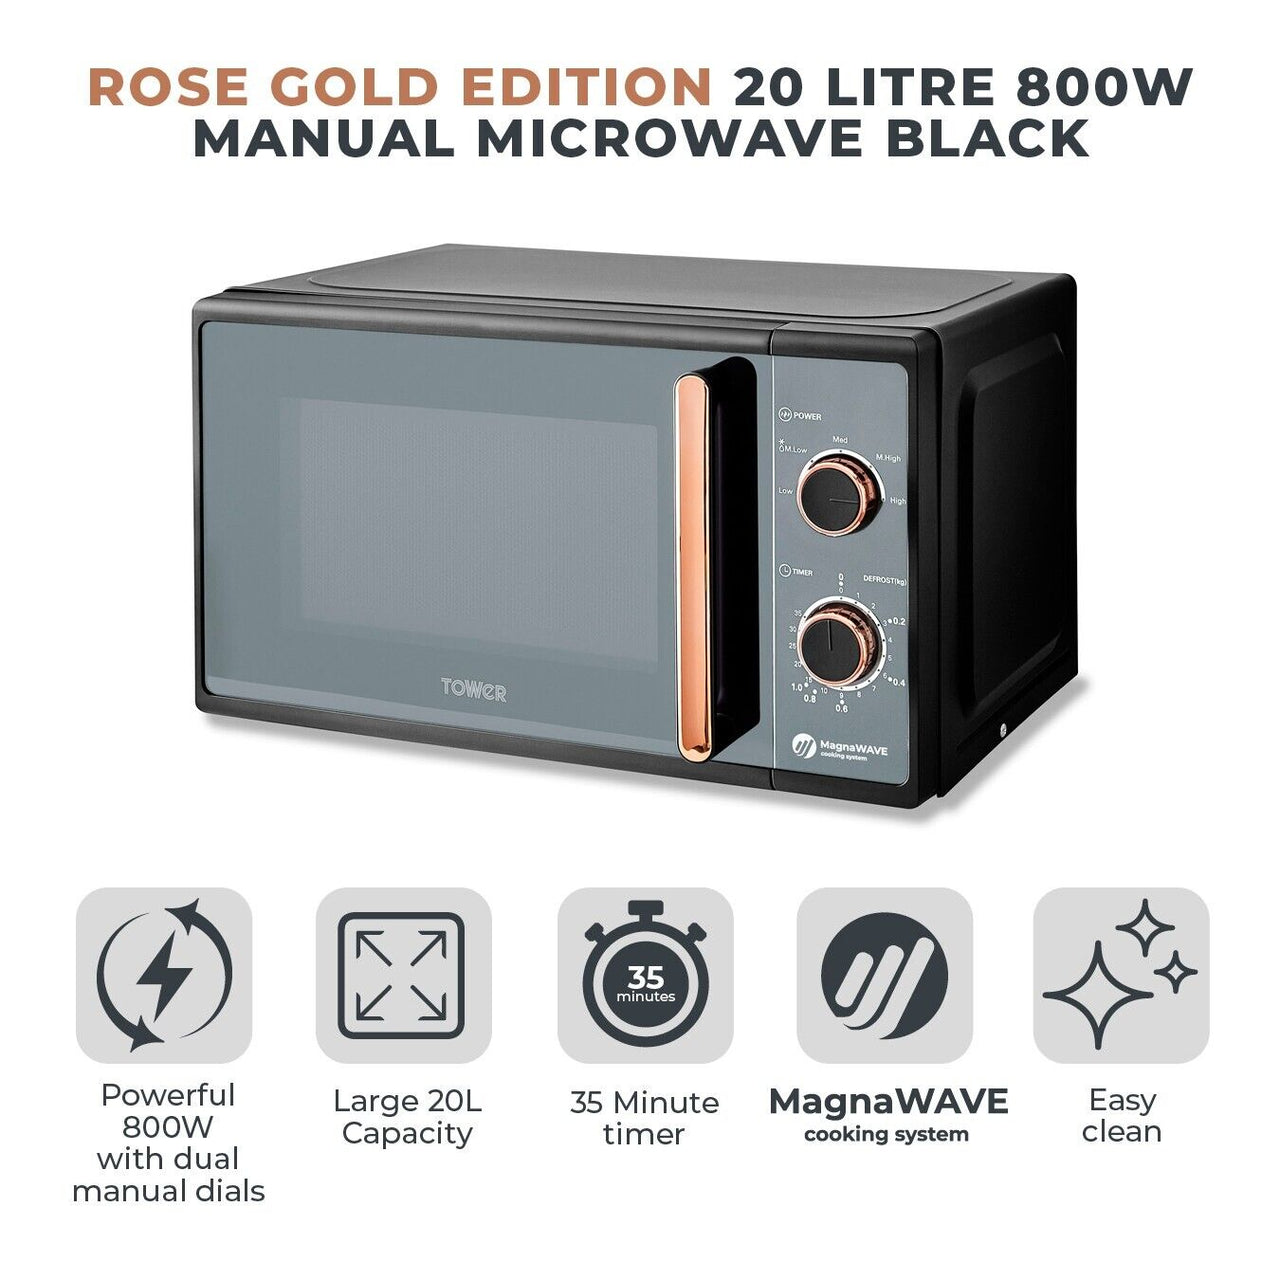 Tower Cavaletto Black & Rose Gold 800W 20L Manual Microwave - 3 Year Guarantee